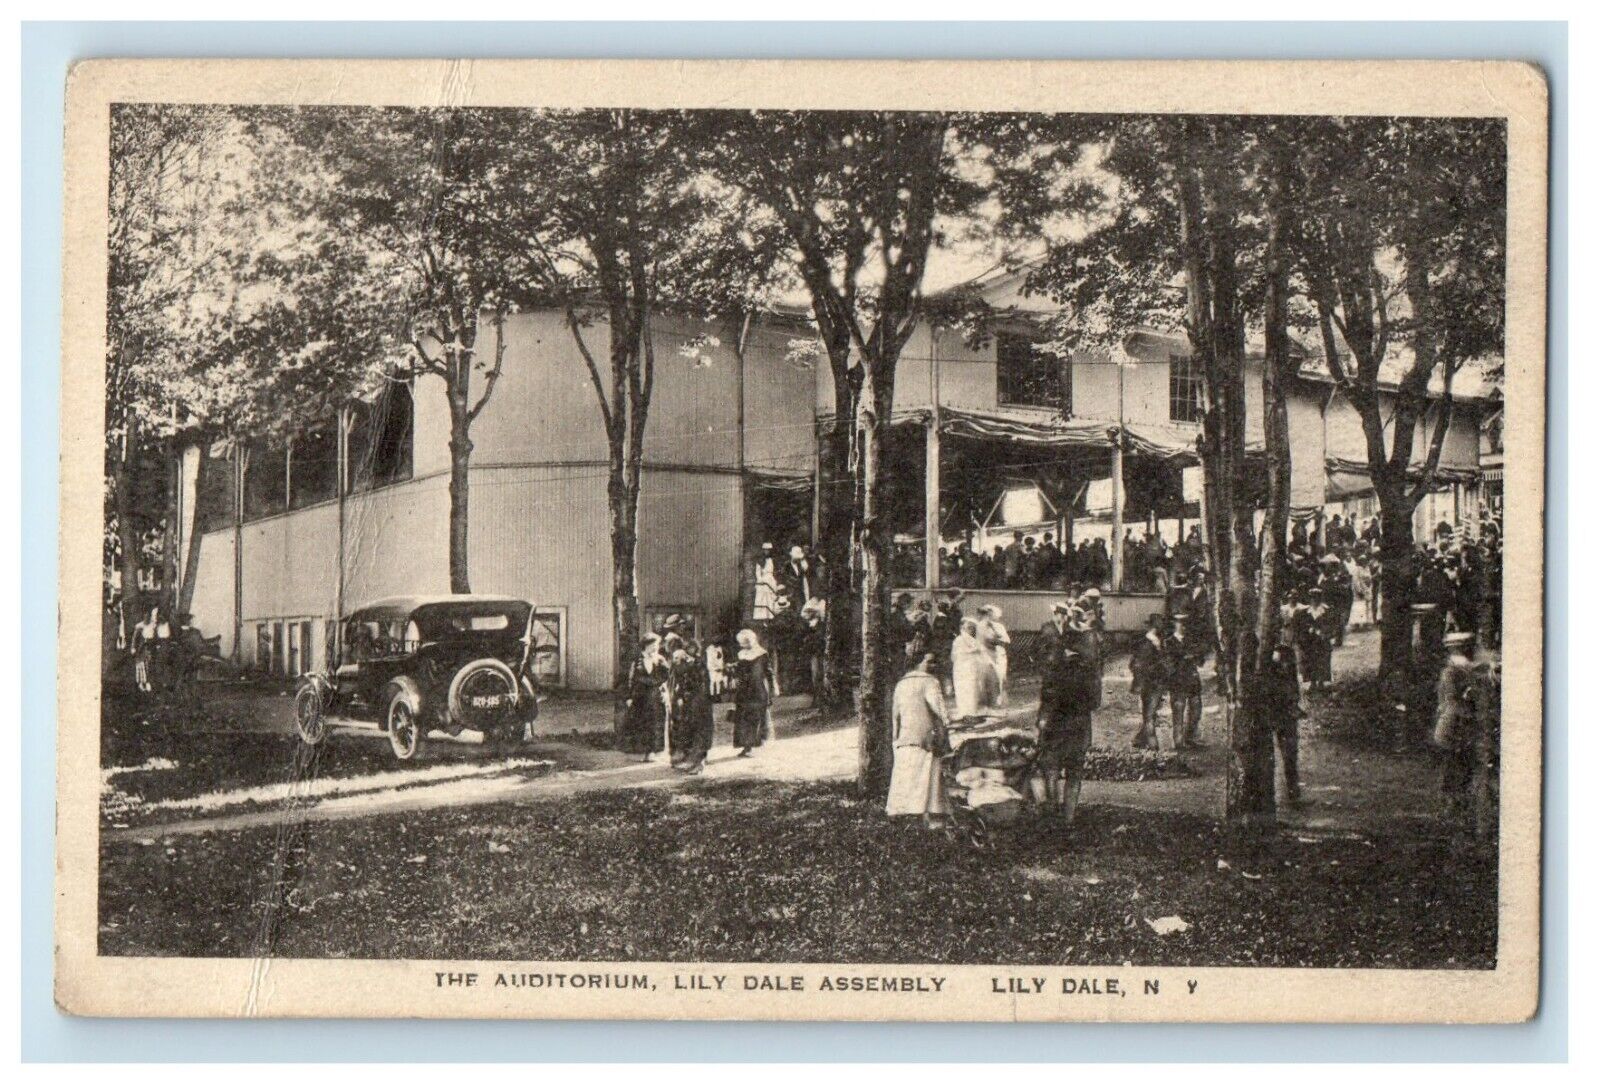 c1930's The Auditorium Lily Dale Assembly Car Lily Dale New York NY Postcard